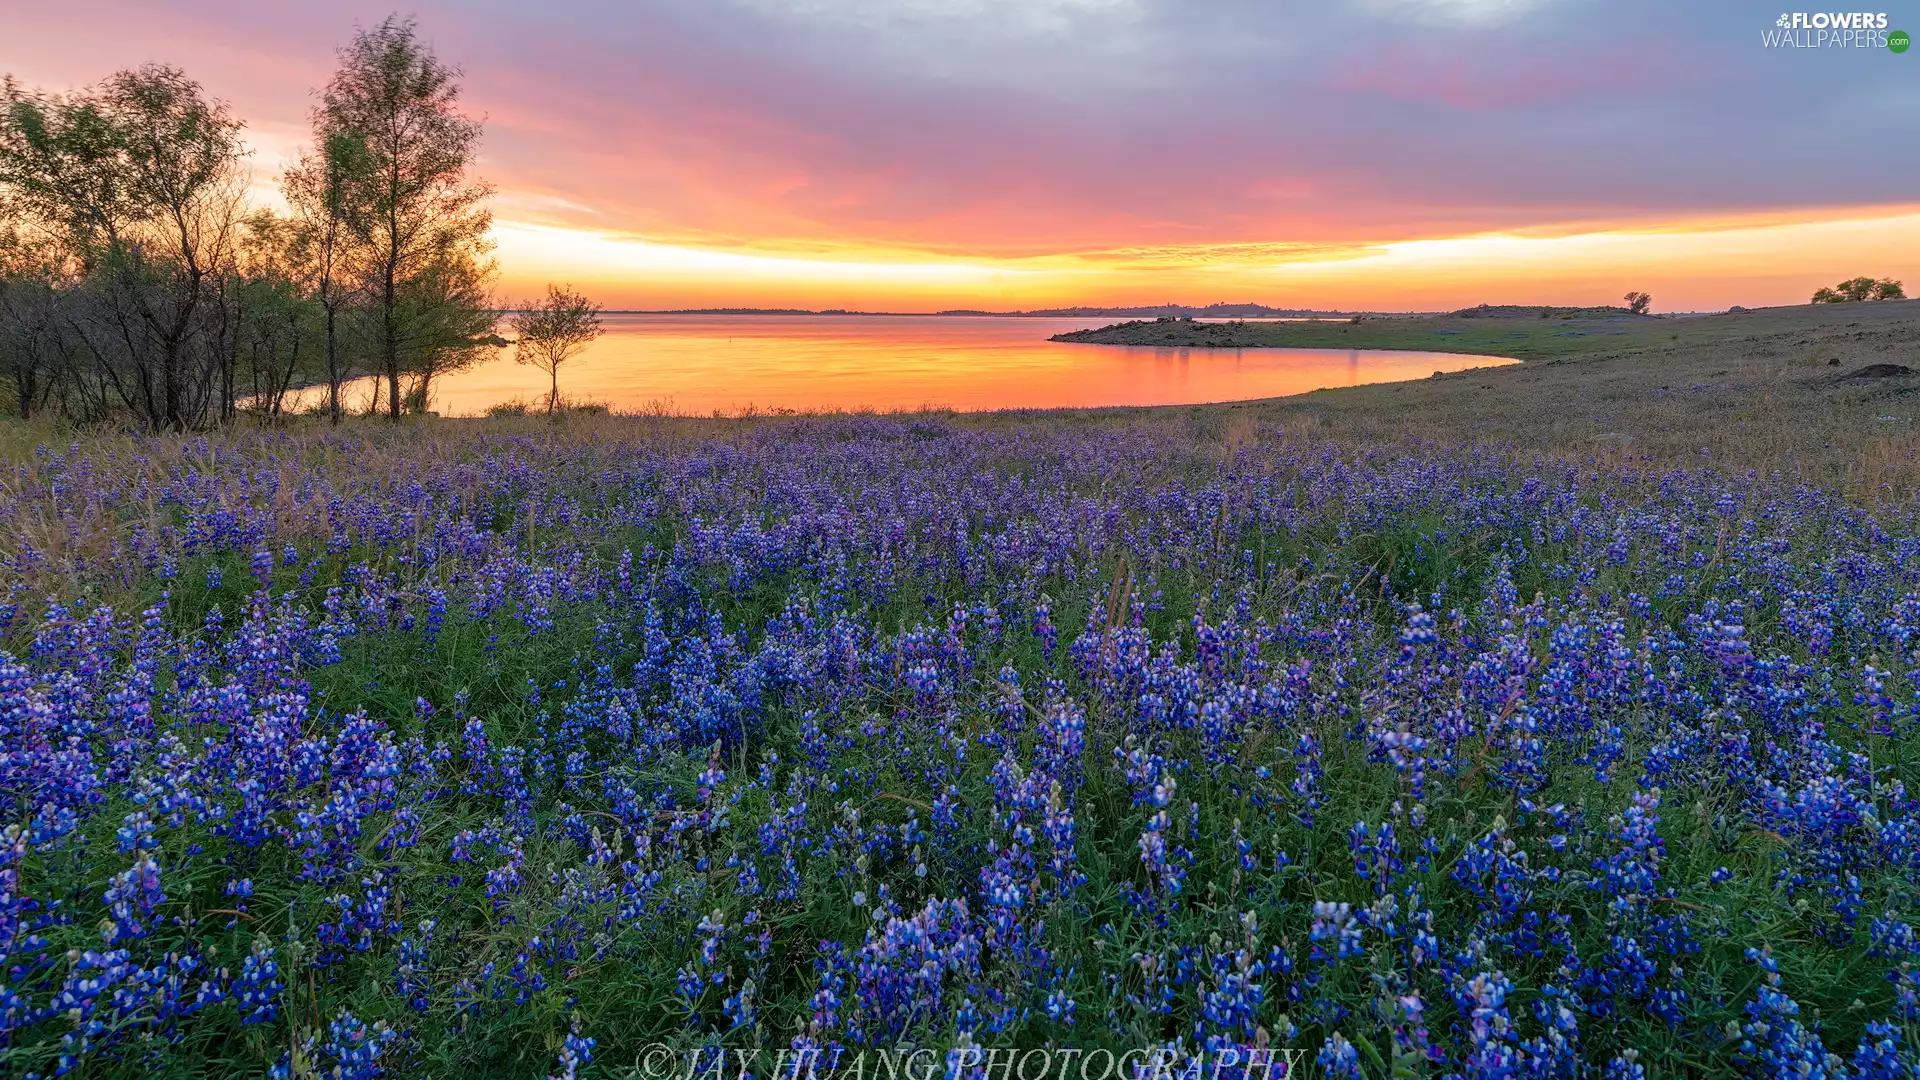 viewes, lake, lupine, Great Sunsets, Meadow, trees